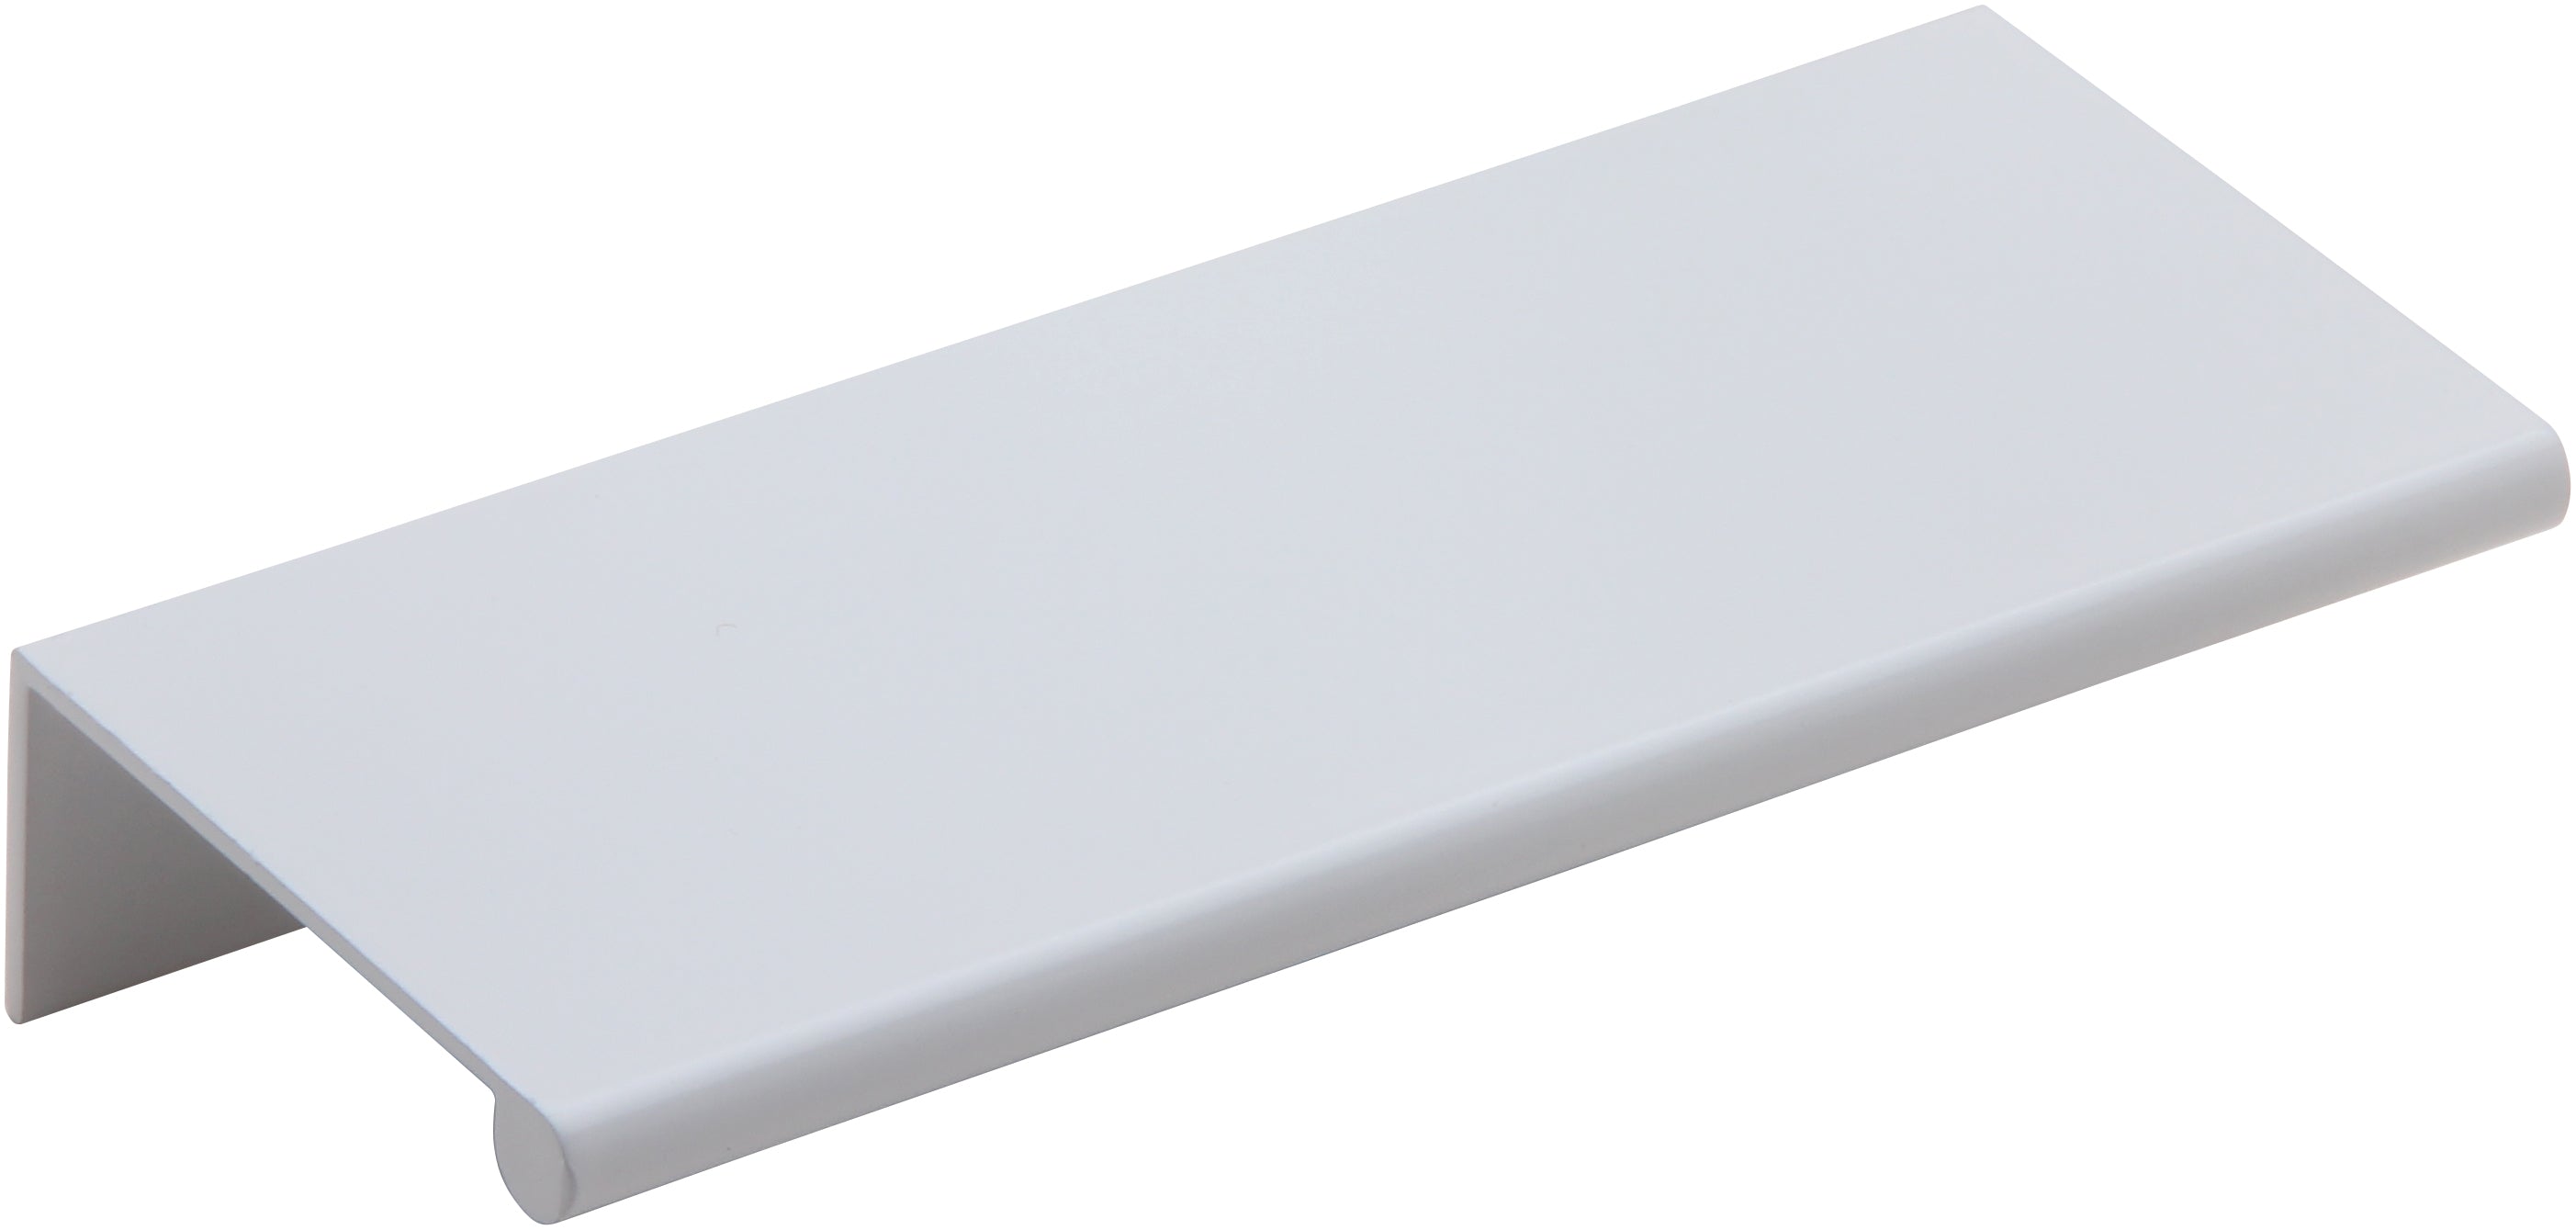 Silverline P1001 - 1-3/4 inch (44mm) Aluminum Mount Finger Edge Tab Pull Handle in Matte White Finish CC: 1-1/4 inch (32mm)